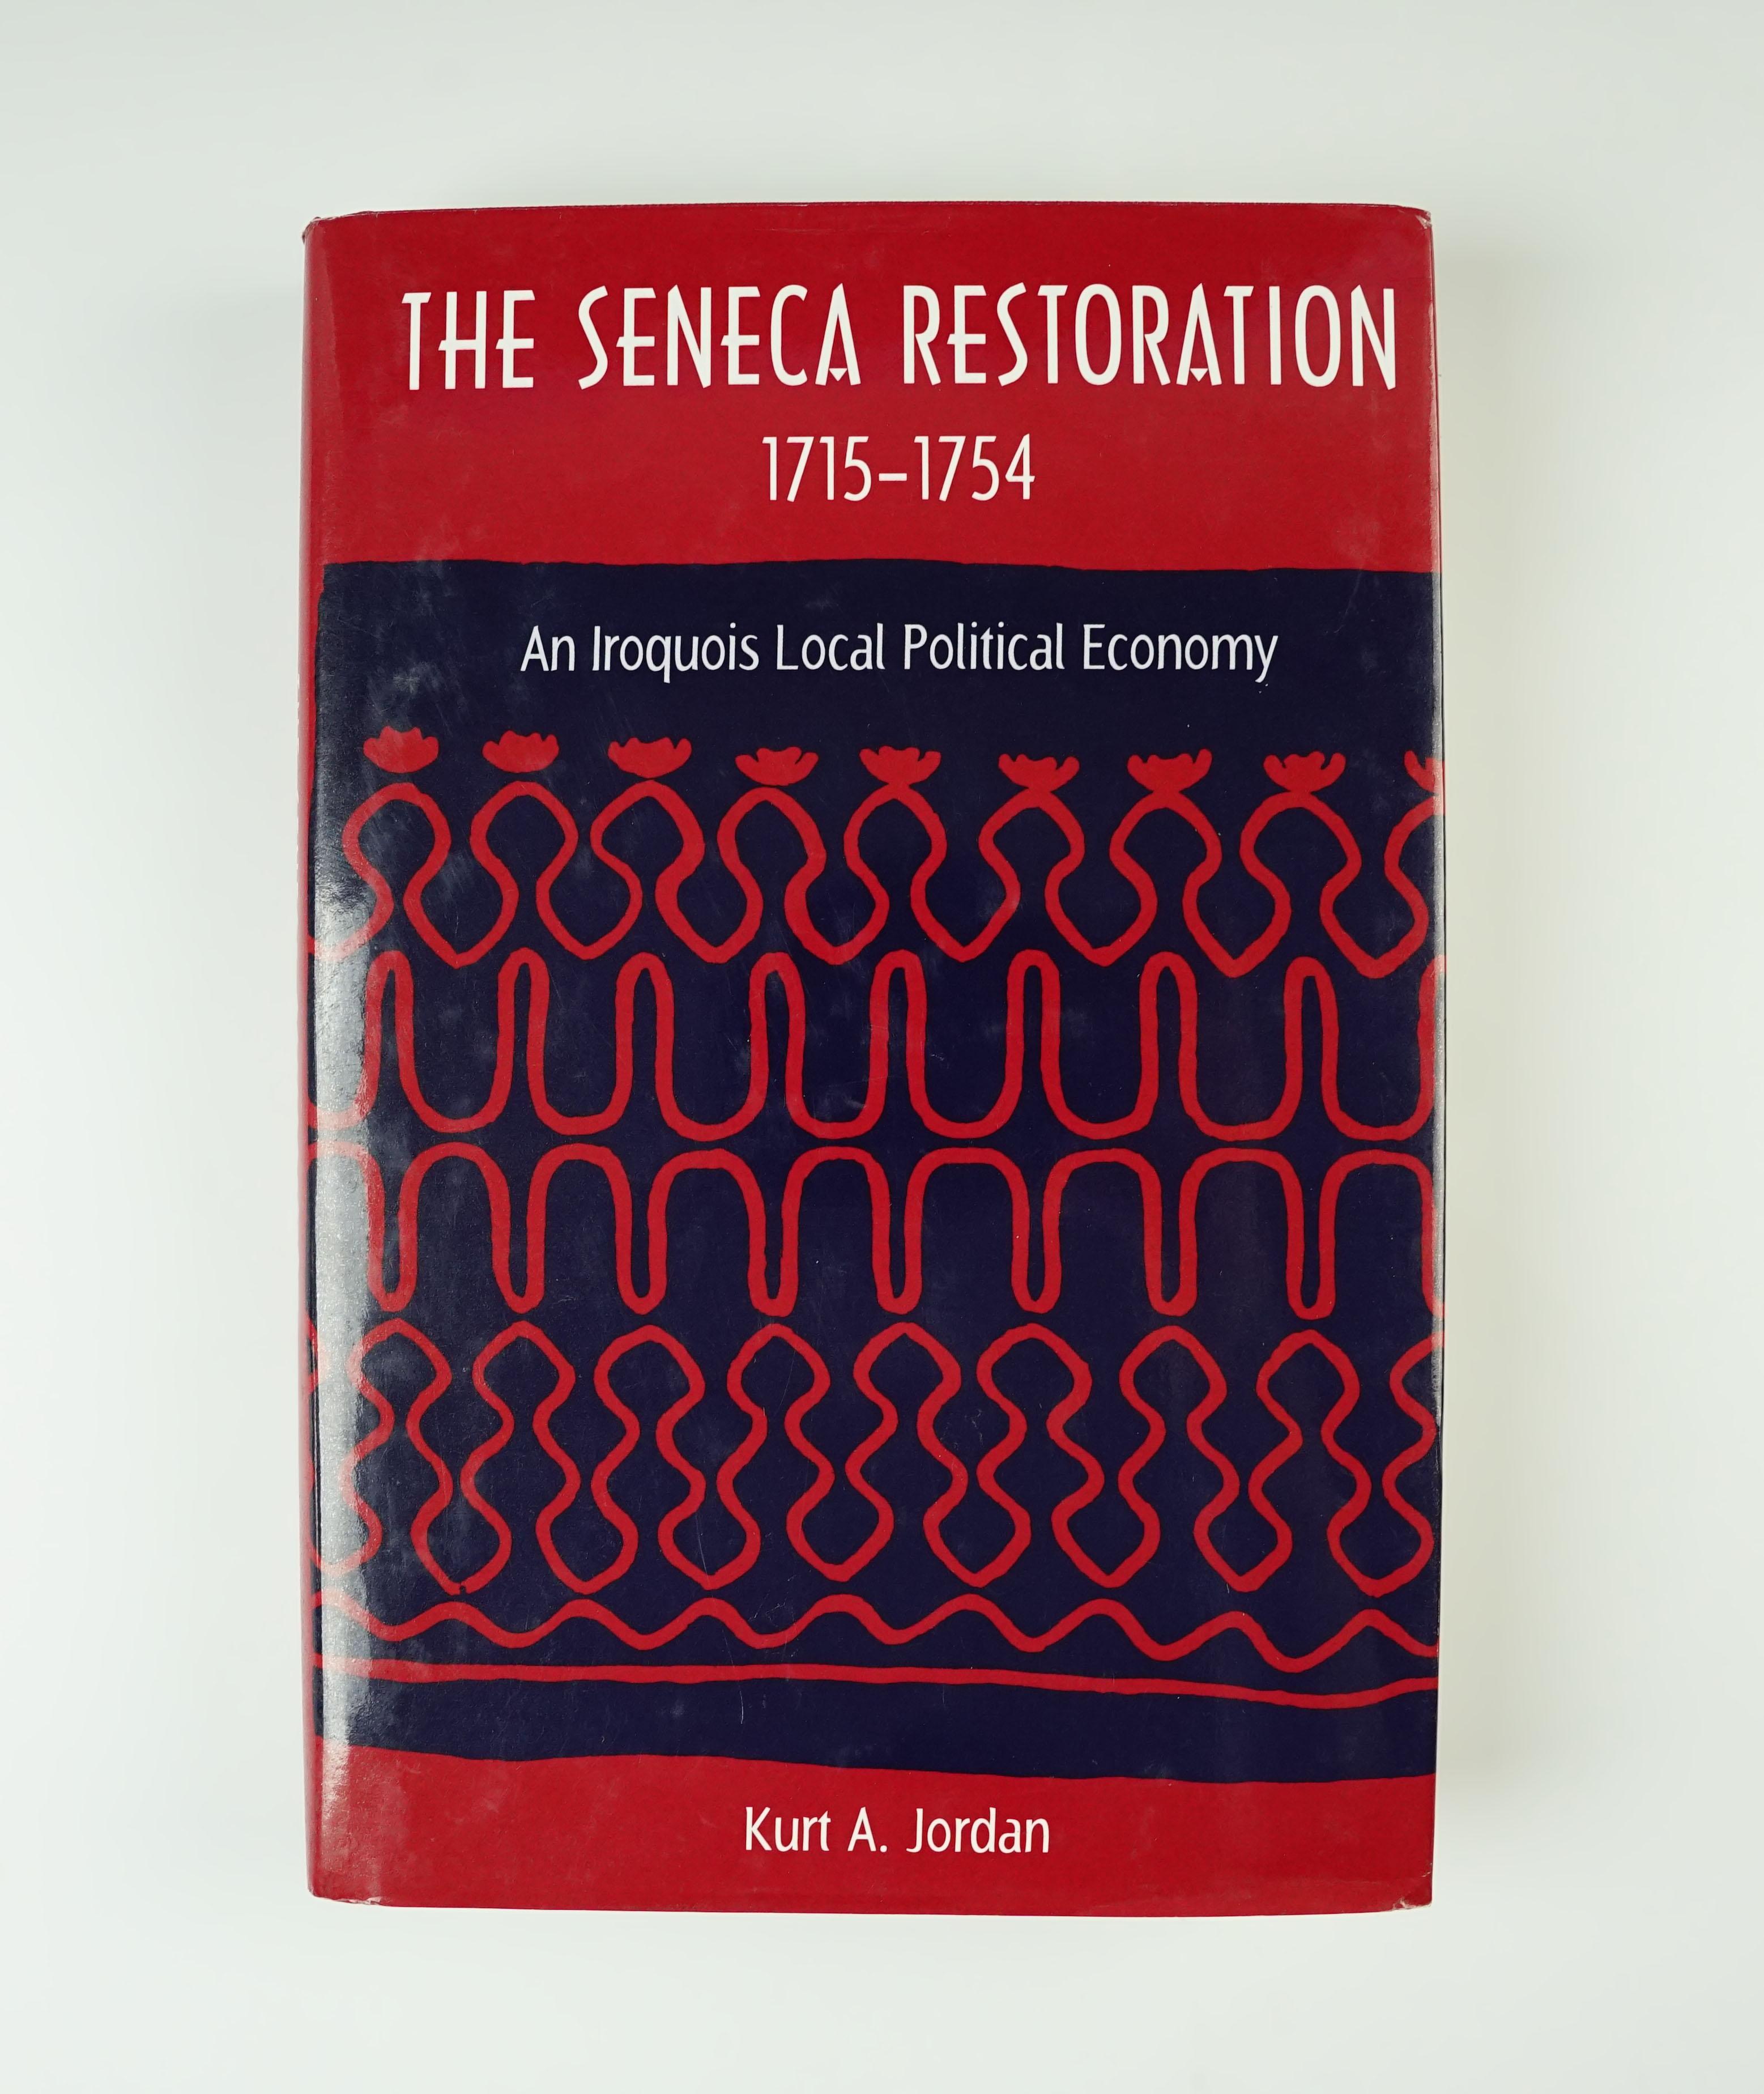 Hardcover Book: The Seneca Restoration - An Iroquois Local Political Economy. First Edition.